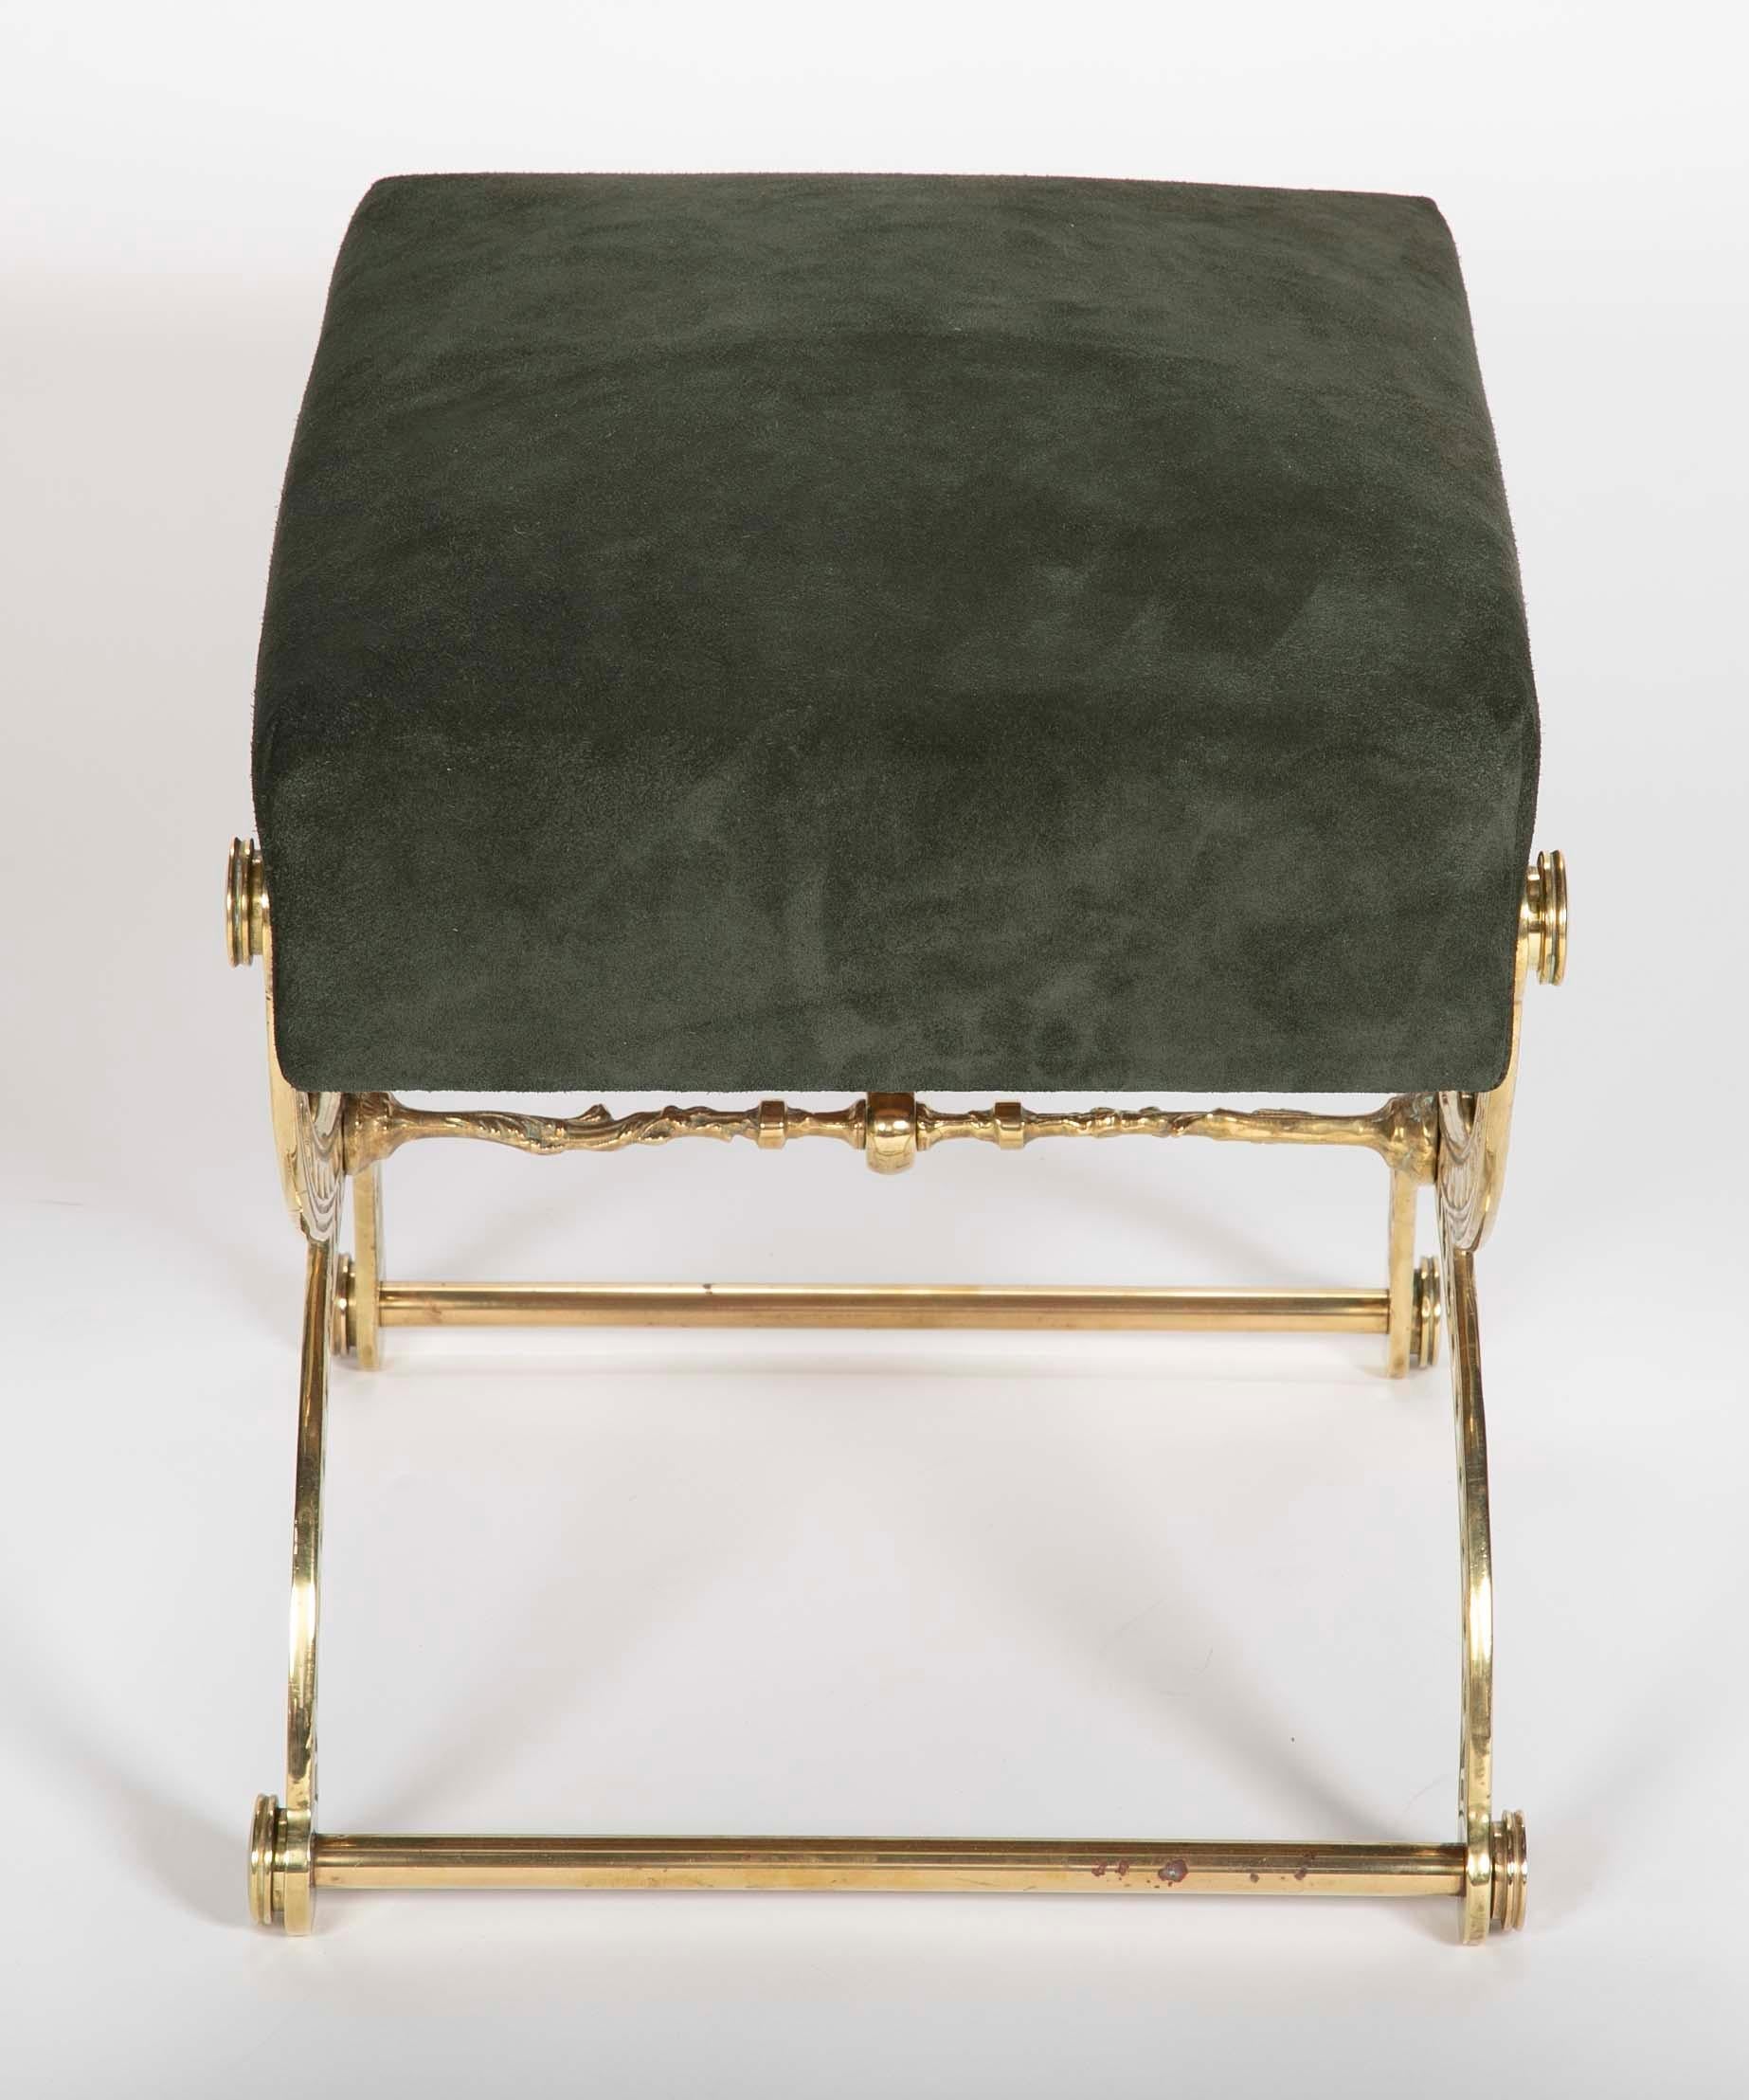 Brass and Suede Curule Form Neoclassical Style Stool with Vitruvian Wave Motif 1